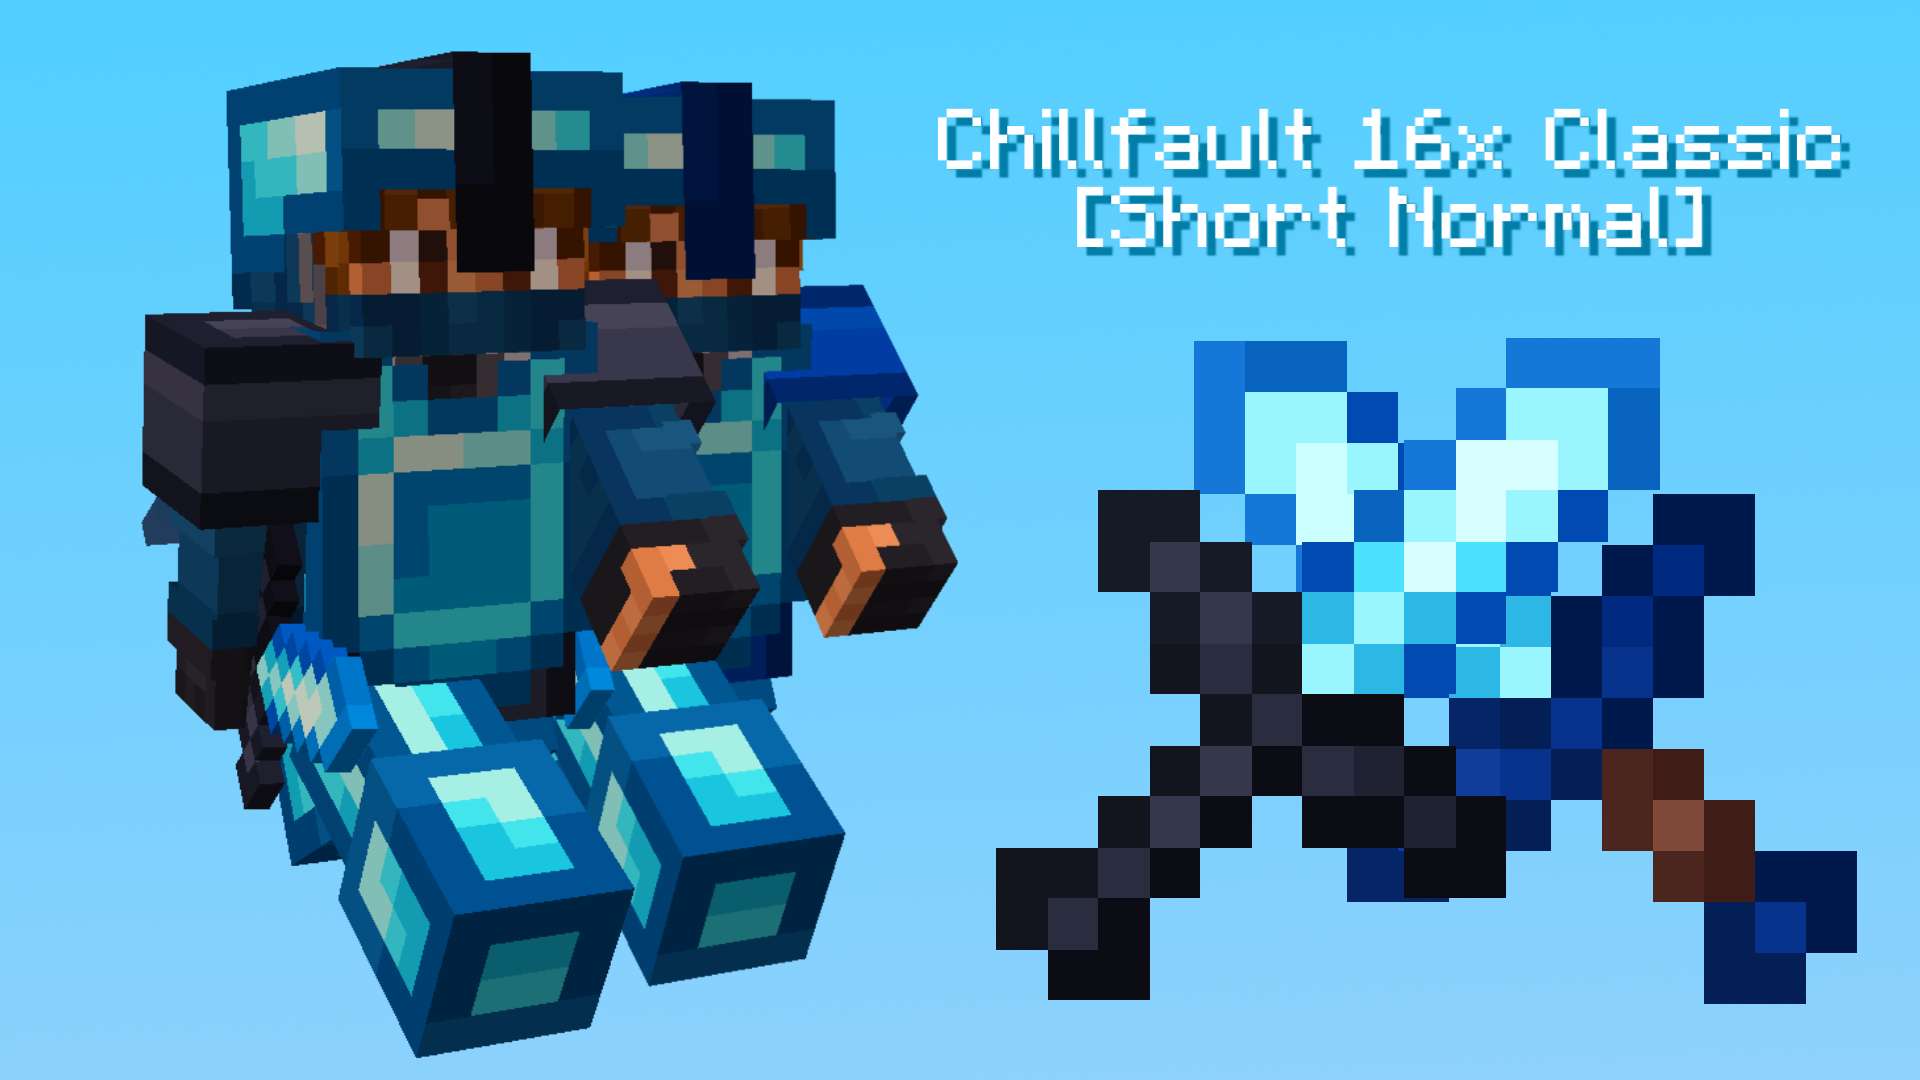 Gallery Banner for Chillfault  Classic [Short Normal] on PvPRP